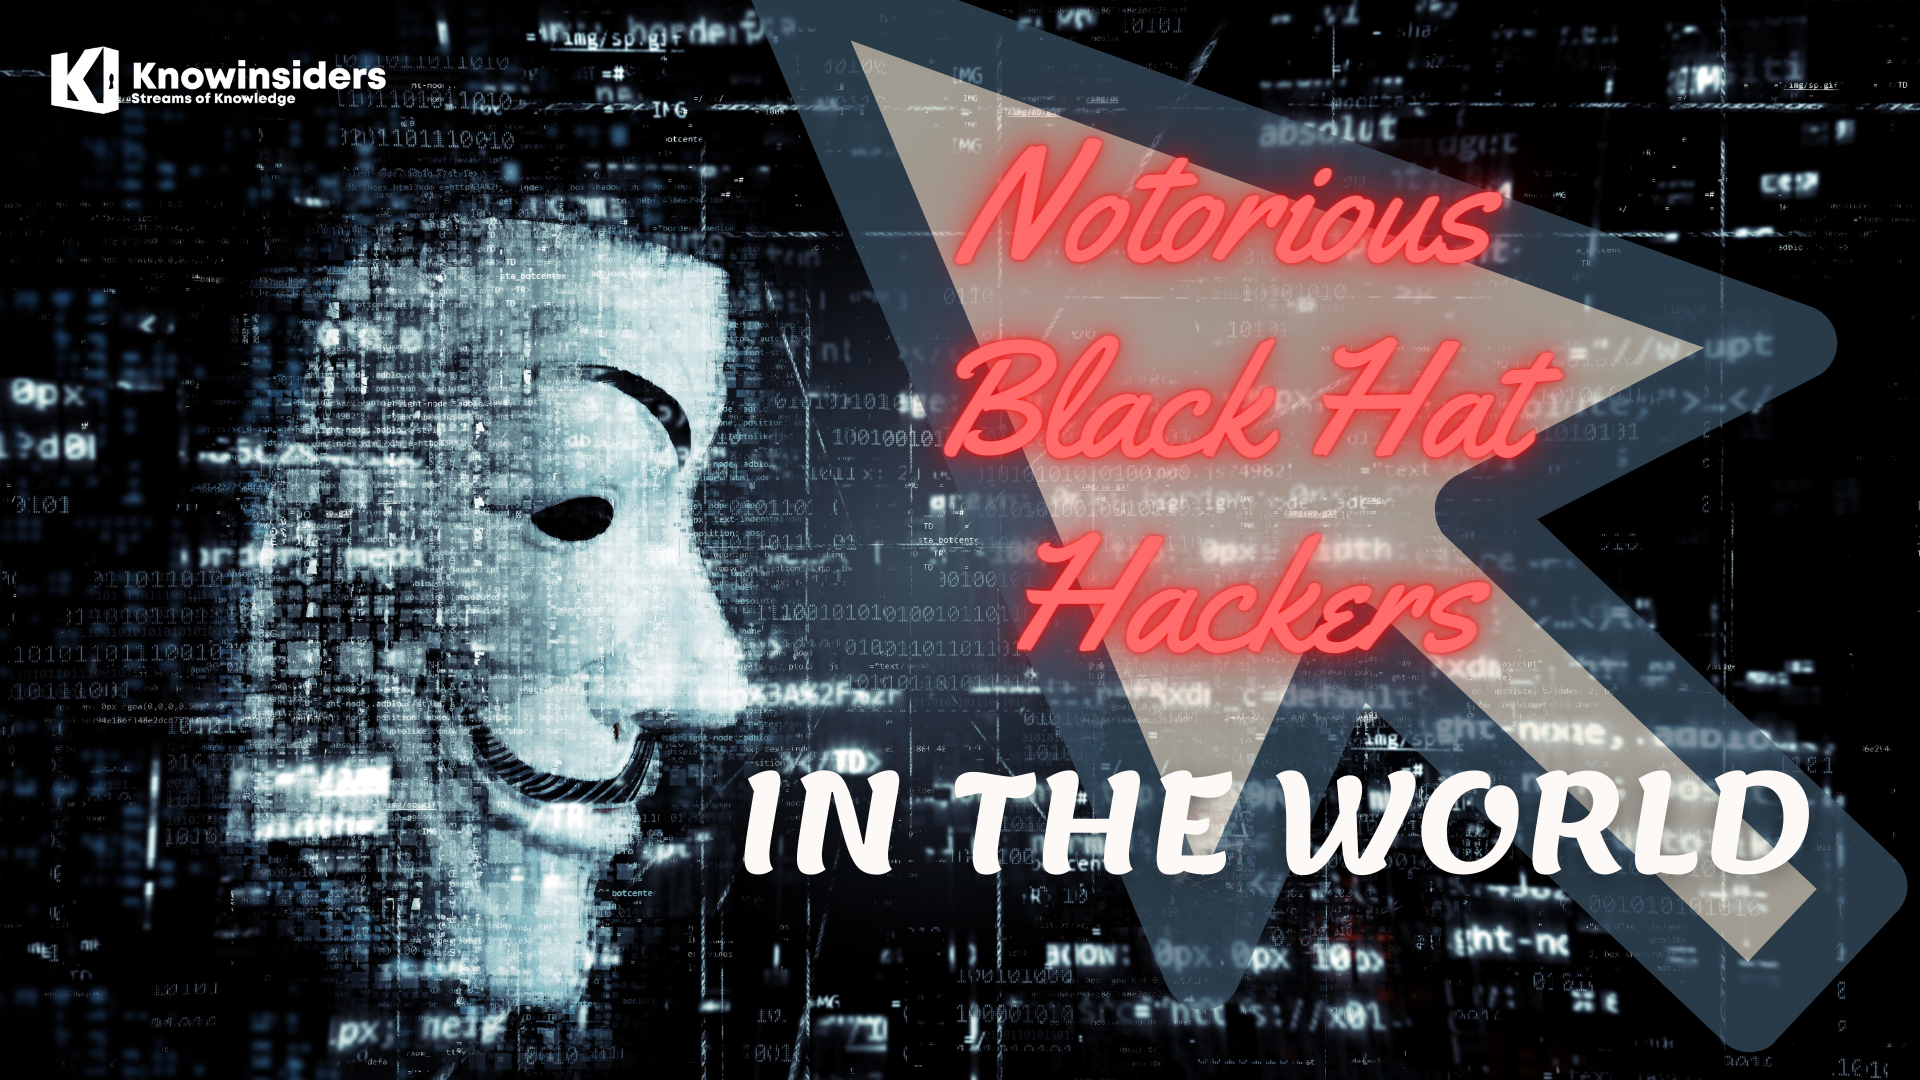 Most Notorious Black Hat Hackers Of All Time. Photo: knowinsiders.